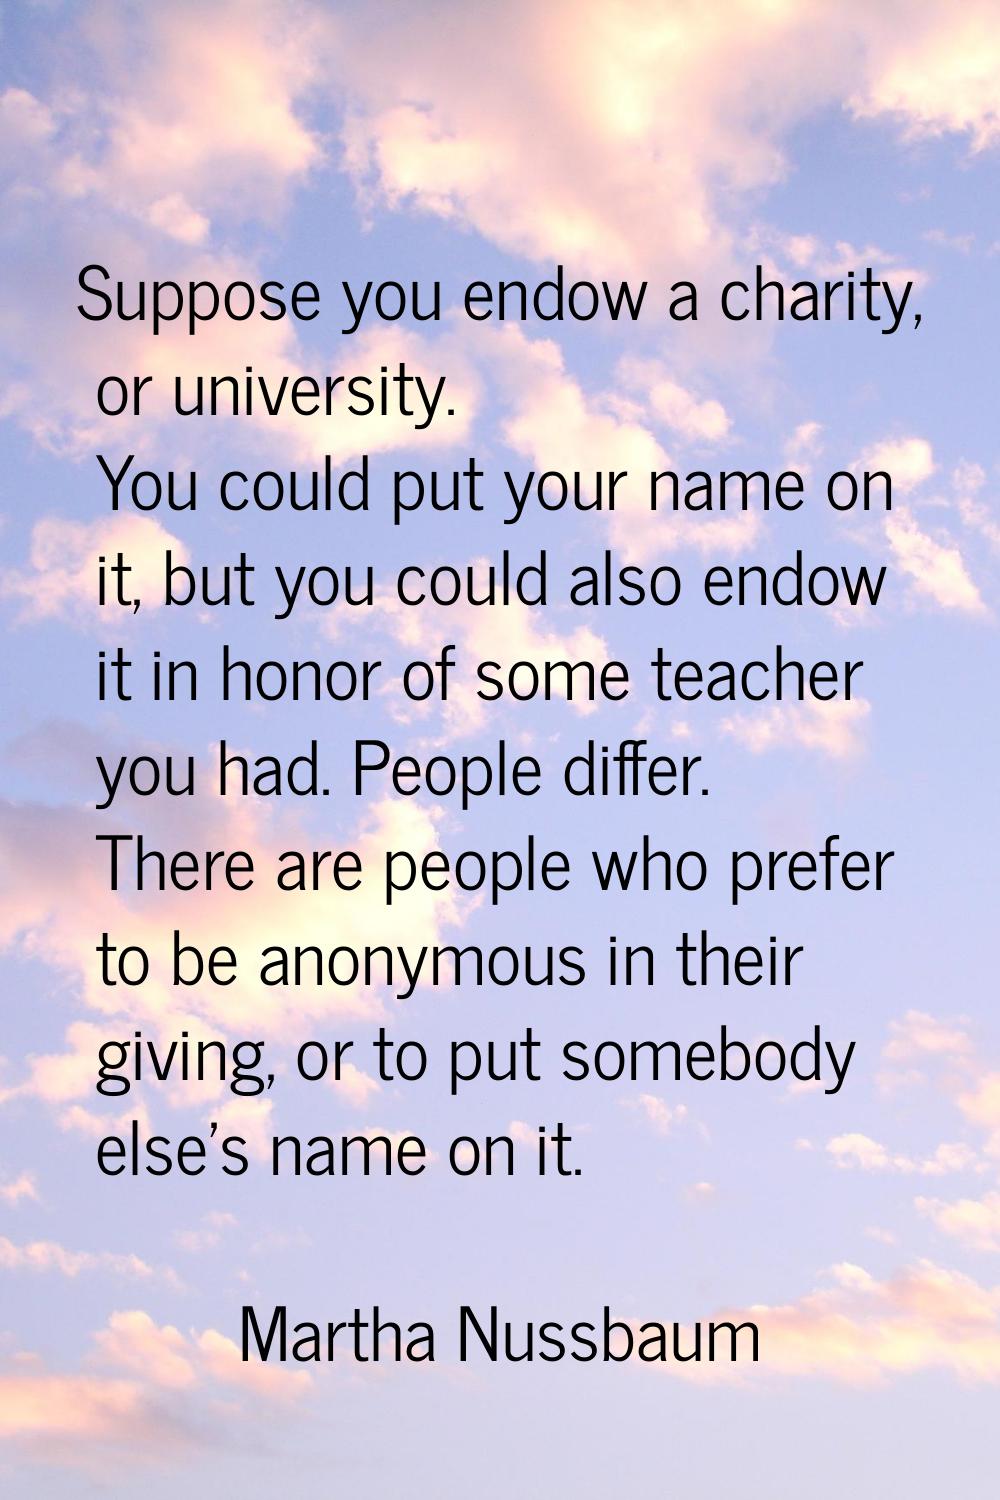 Suppose you endow a charity, or university. You could put your name on it, but you could also endow